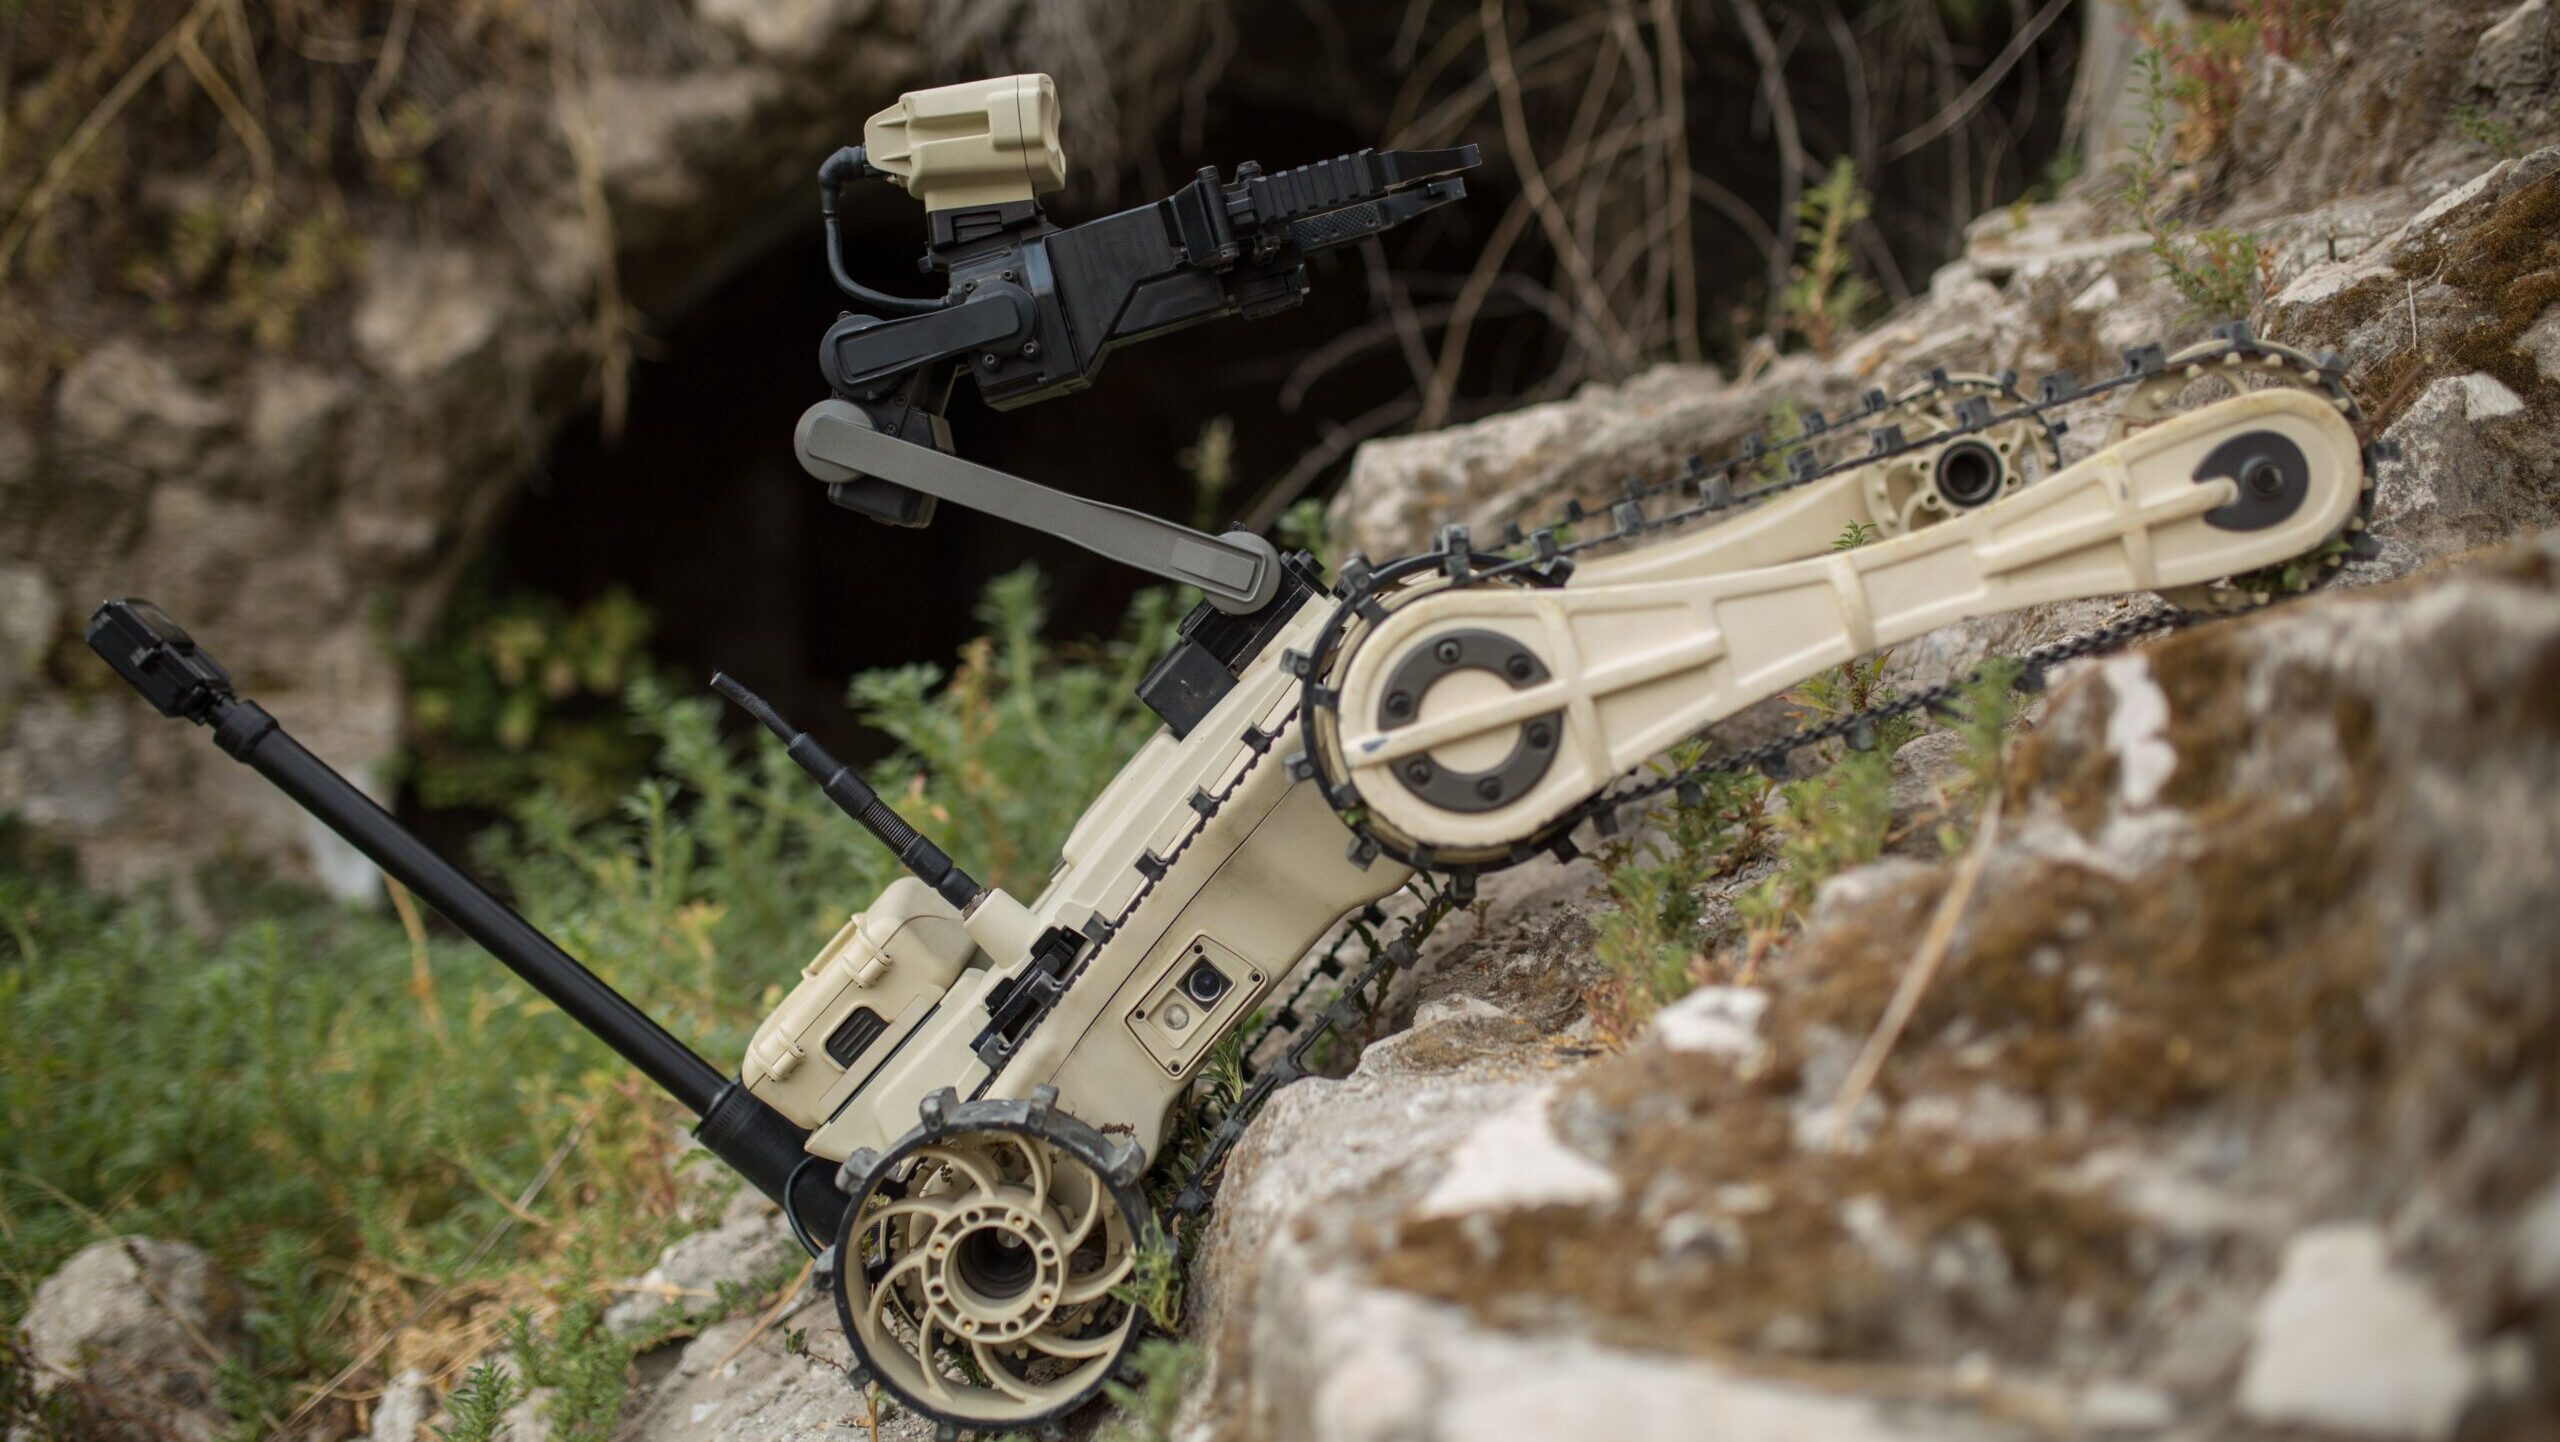 US Marines buy 200 tactical robots from Israel’s Roboteam amid all-time high demand: CEO